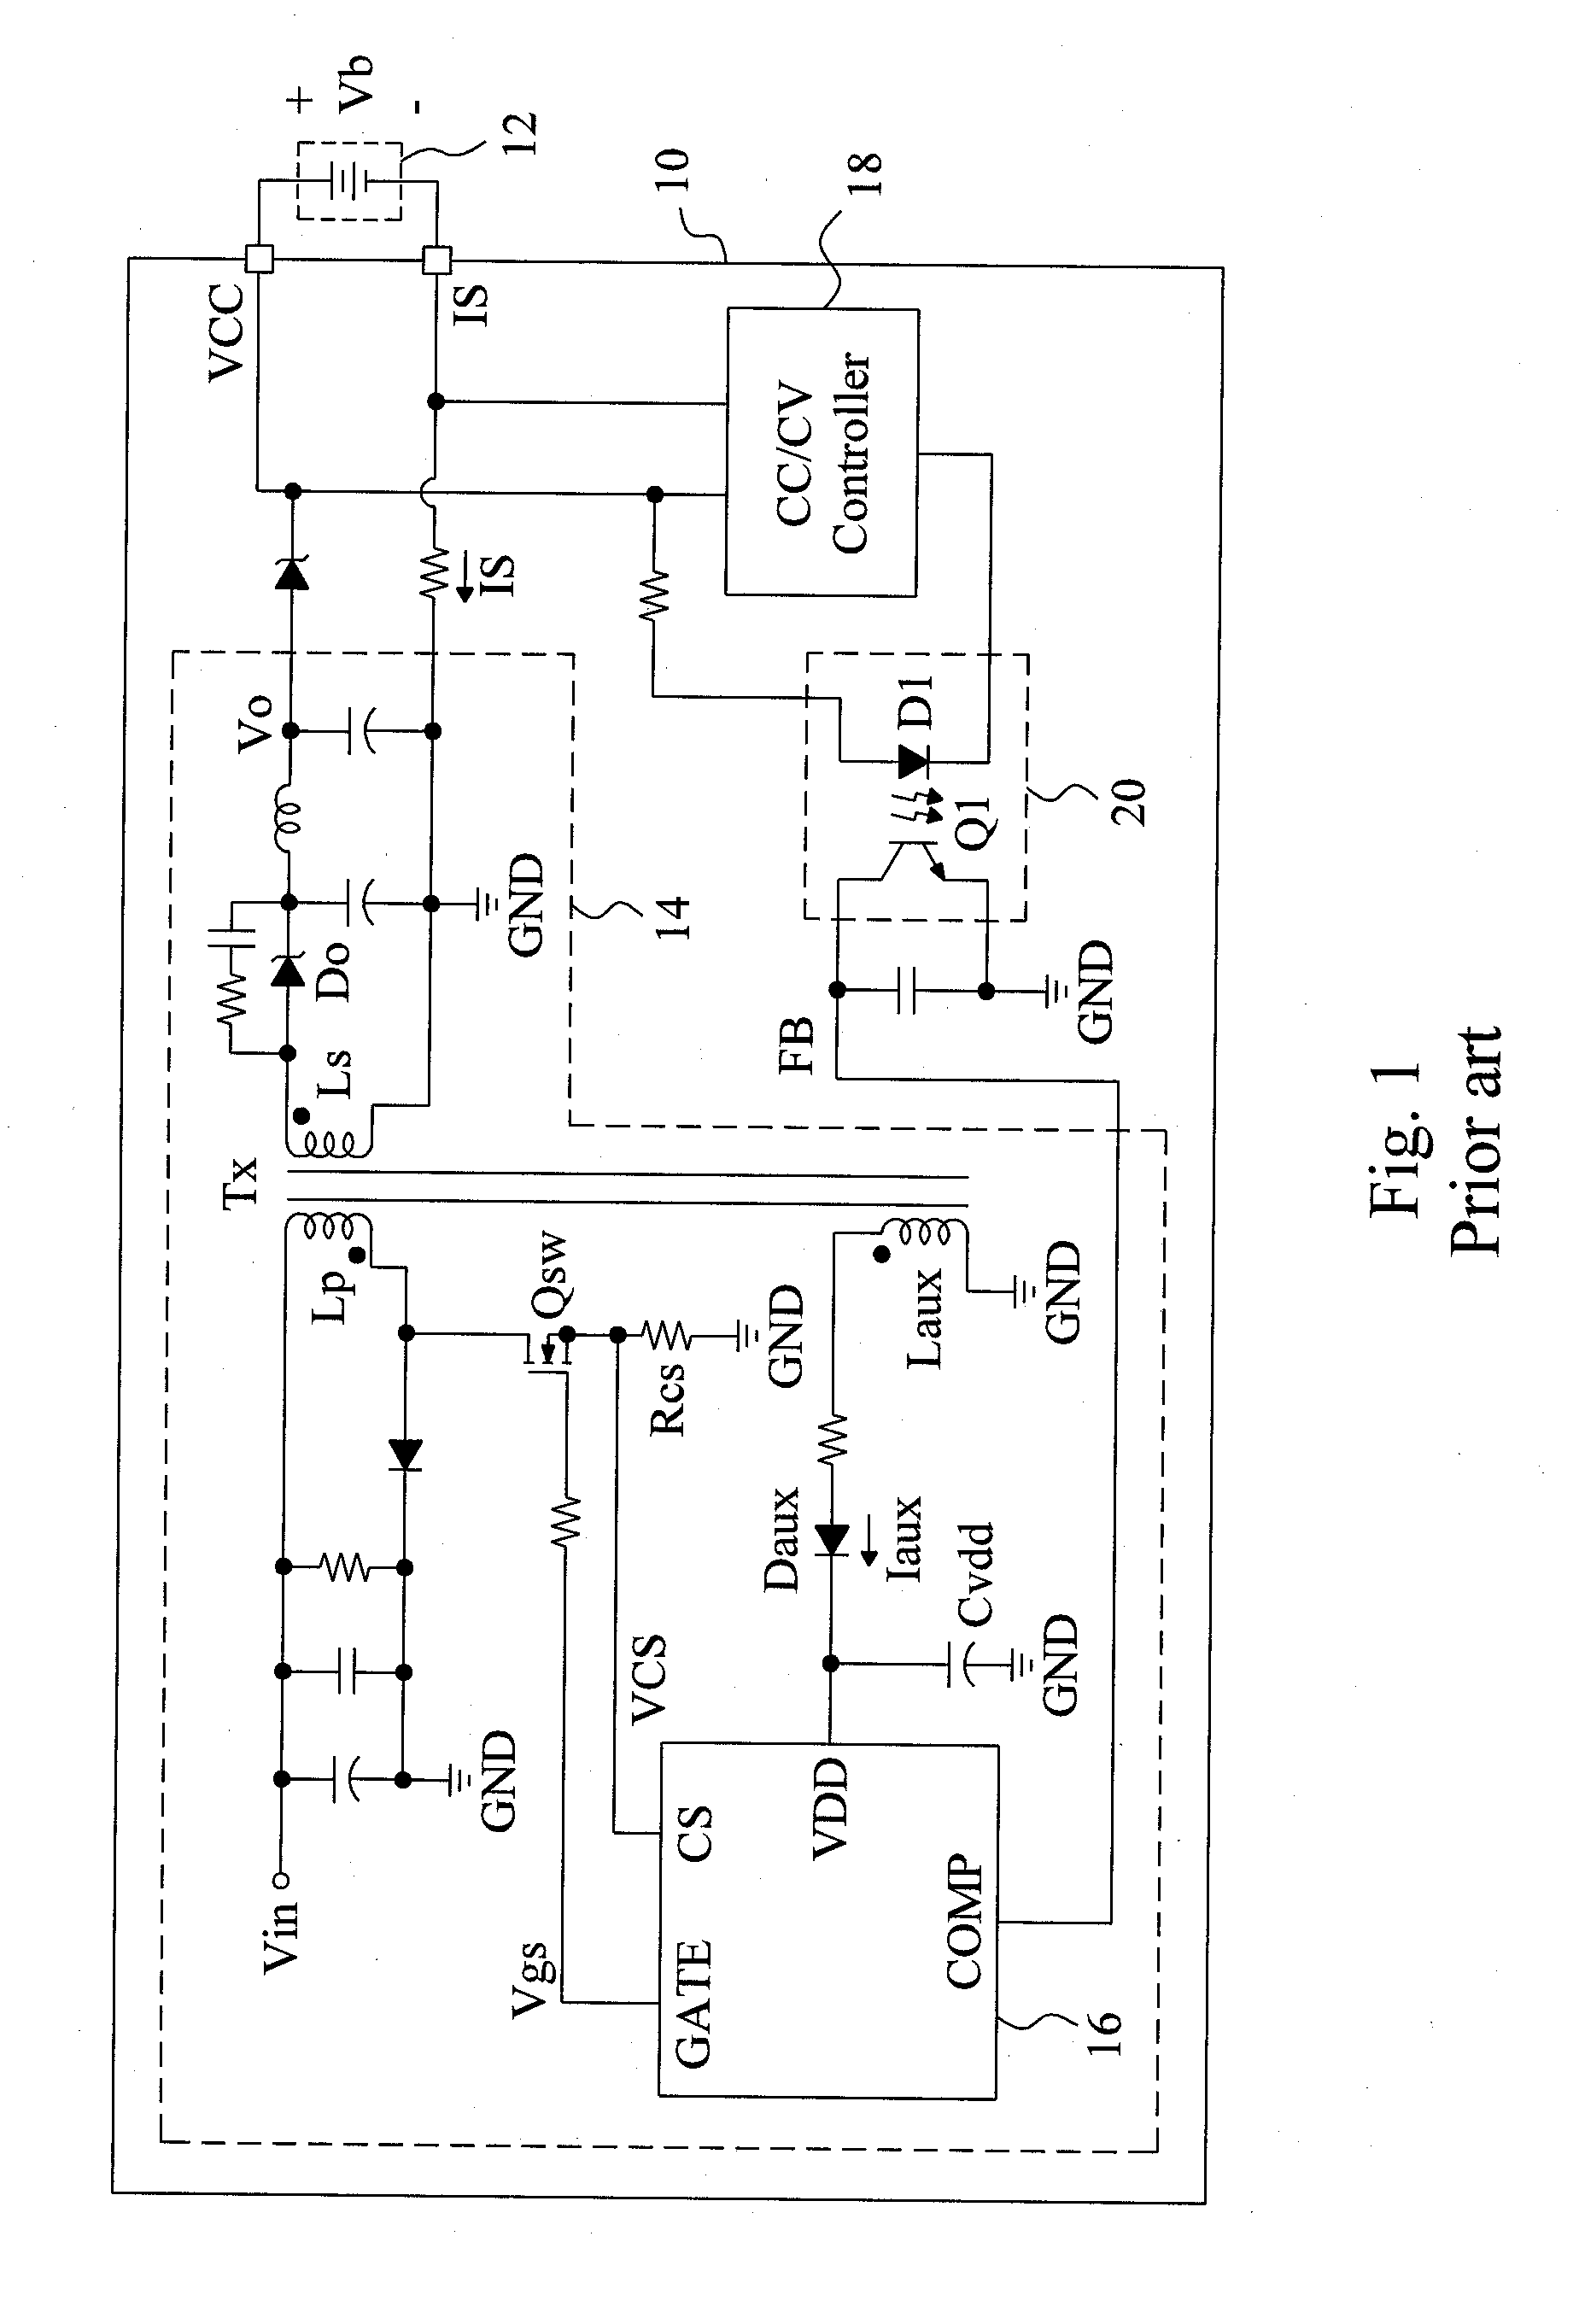 Apparatus and method for improving the standby efficiency of a charger, and ultra low standby power charger